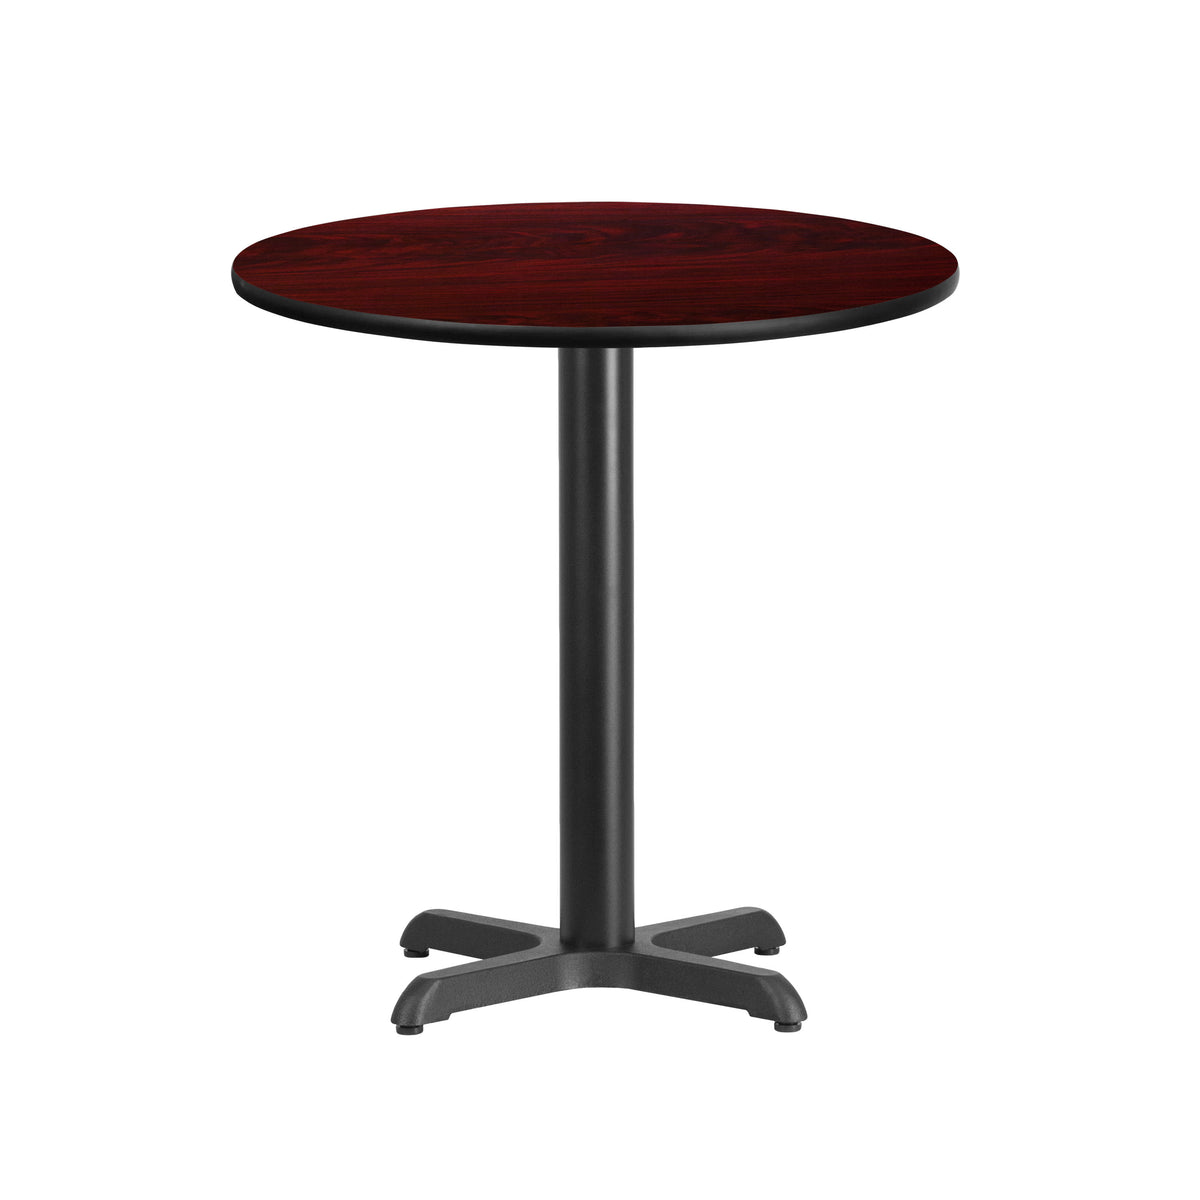 Mahogany |#| 24inch Round Mahogany Laminate Table Top with 22inch x 22inch Table Height Base